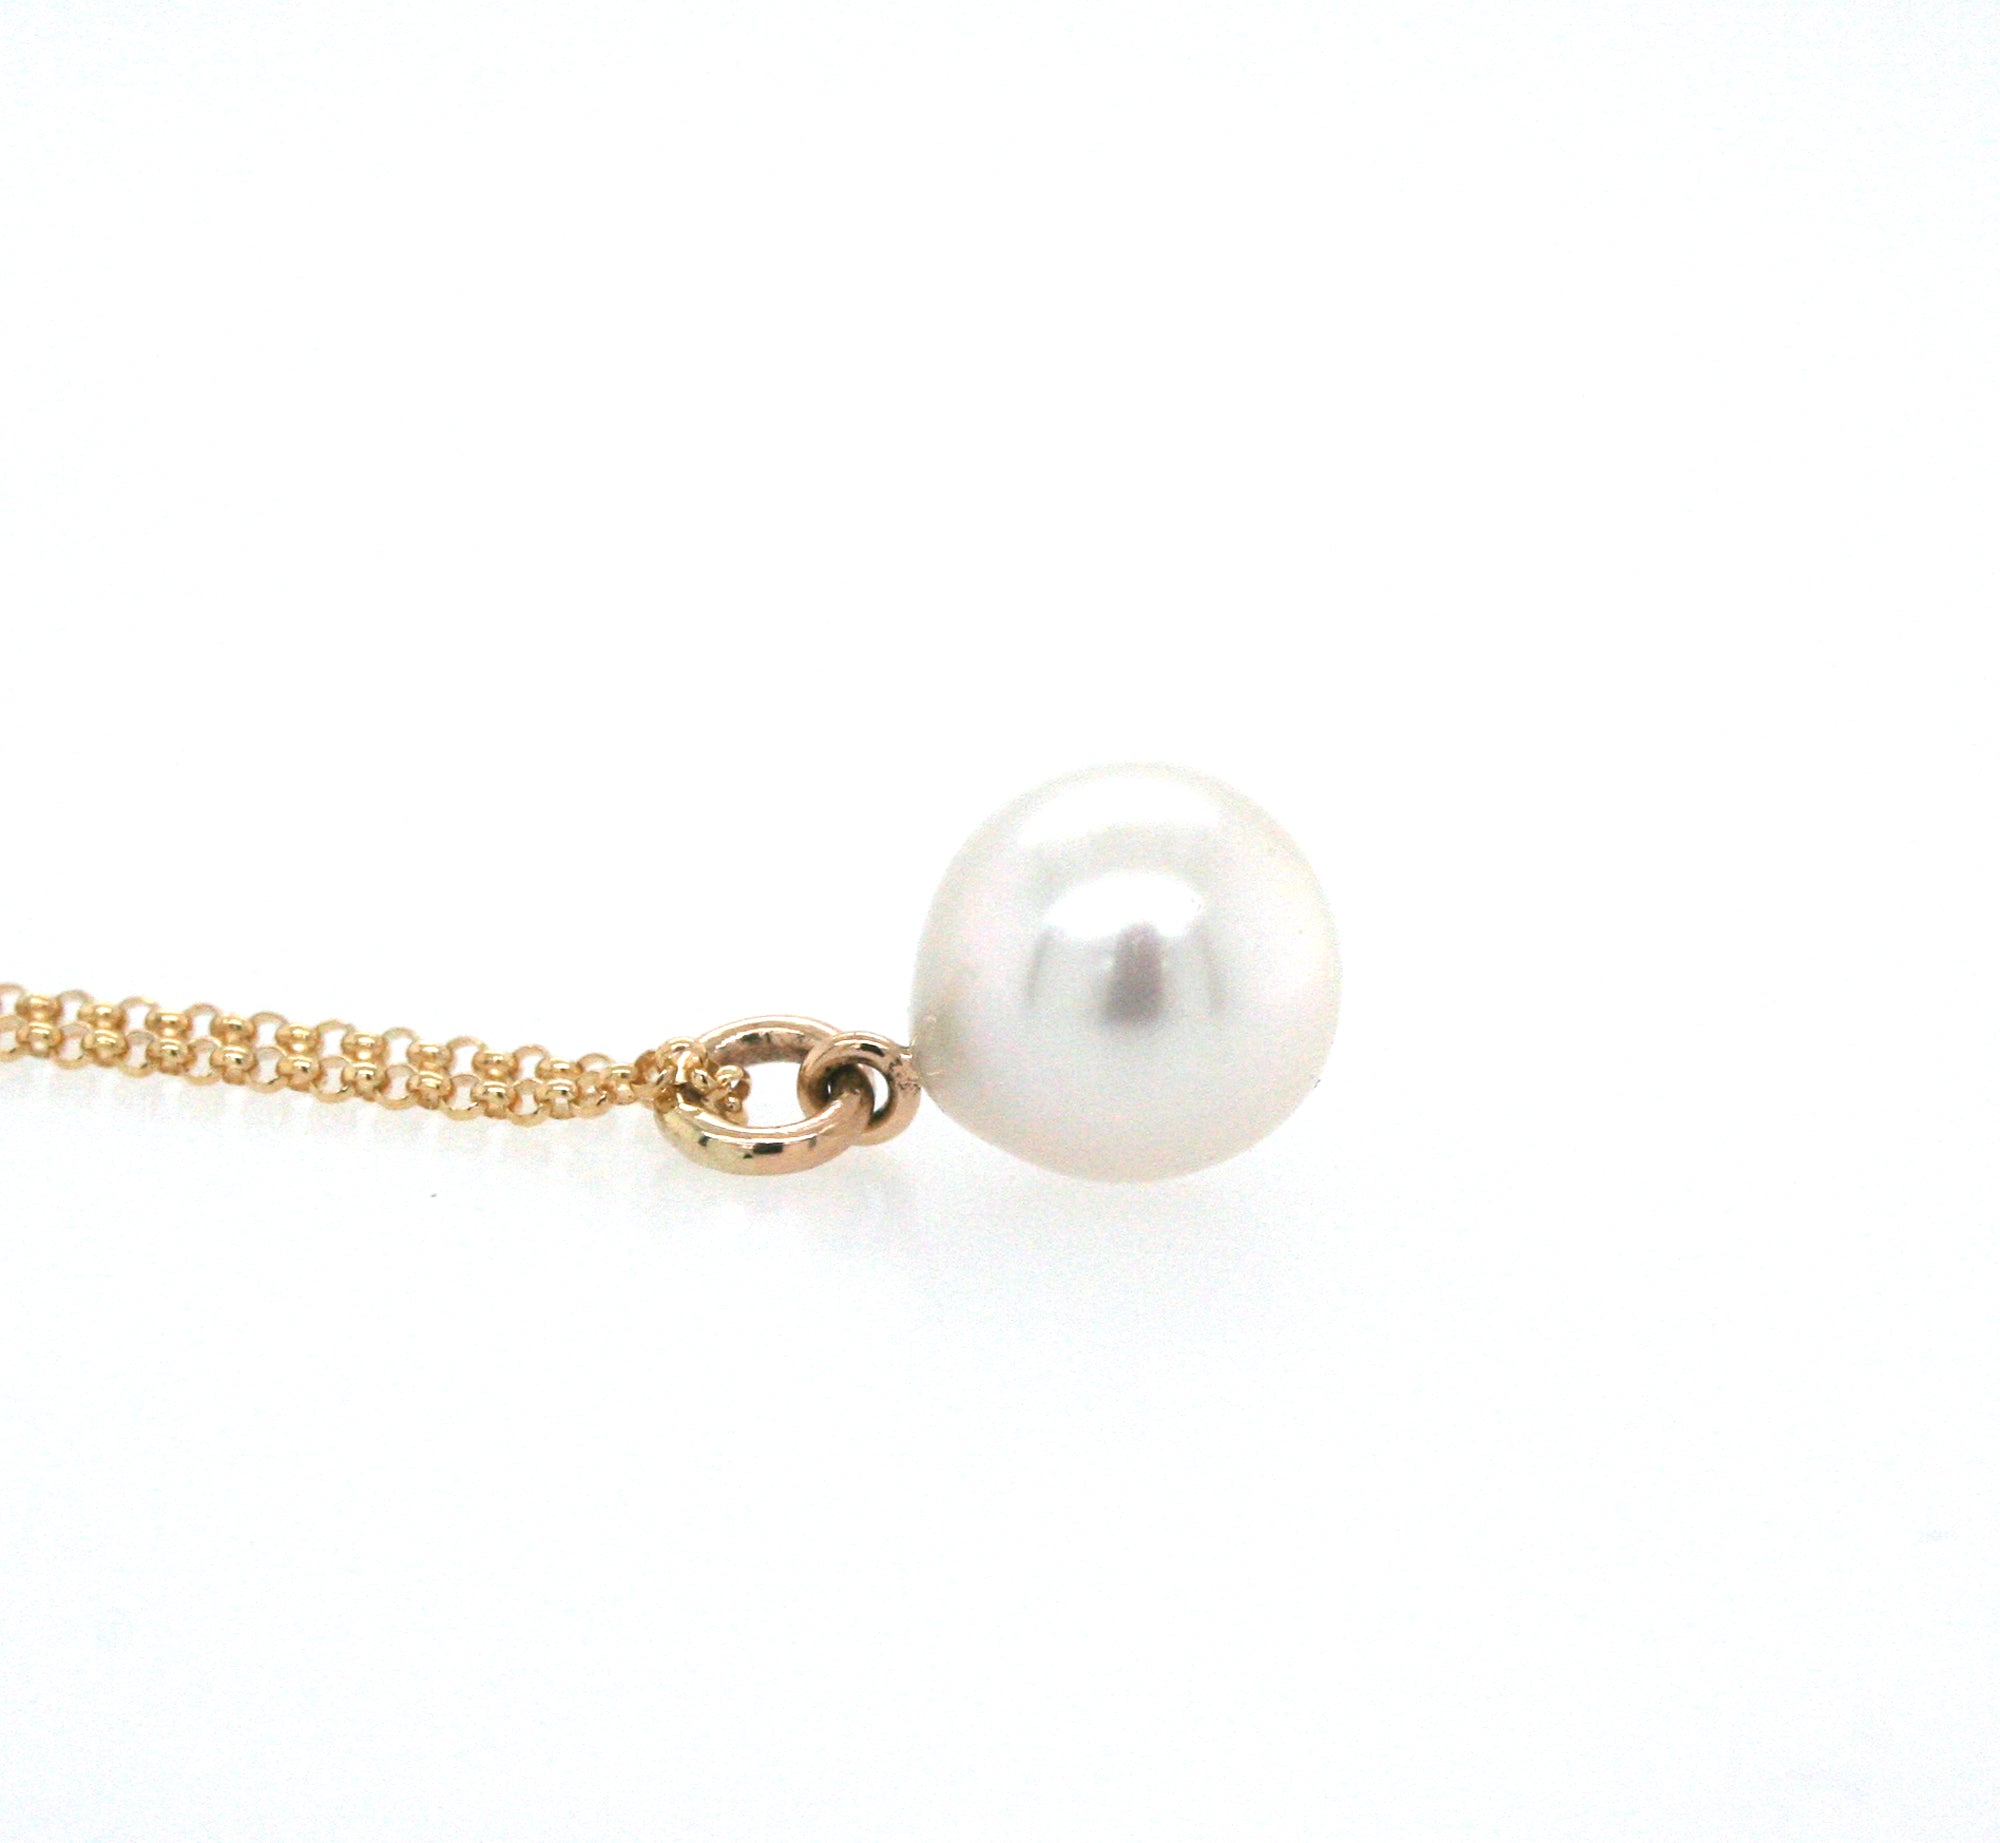 South Sea Baroque Pearl Necklace, Solid 14k Gold Pearl Necklace, Solid Gold Chain, Single Pearl Necklace, Bridal Necklace, Gift for Her